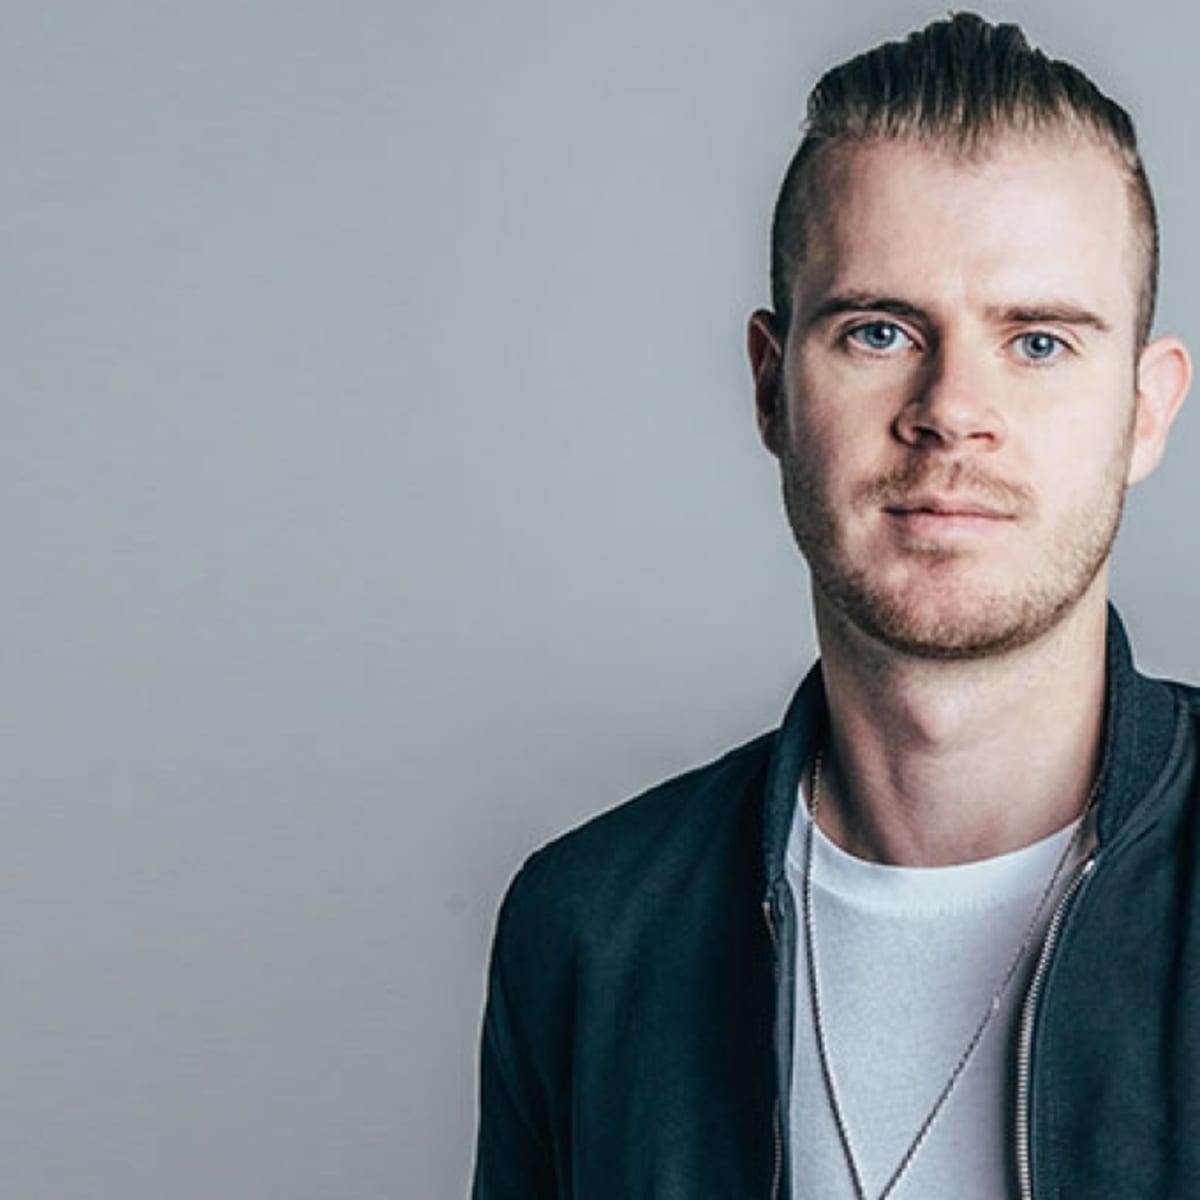 Get Hypnotized with 'Hypnotic' - Wilkinson on New Music, the Writing  Process and Much More [Interview]  - The Latest Electronic Dance  Music News, Reviews & Artists